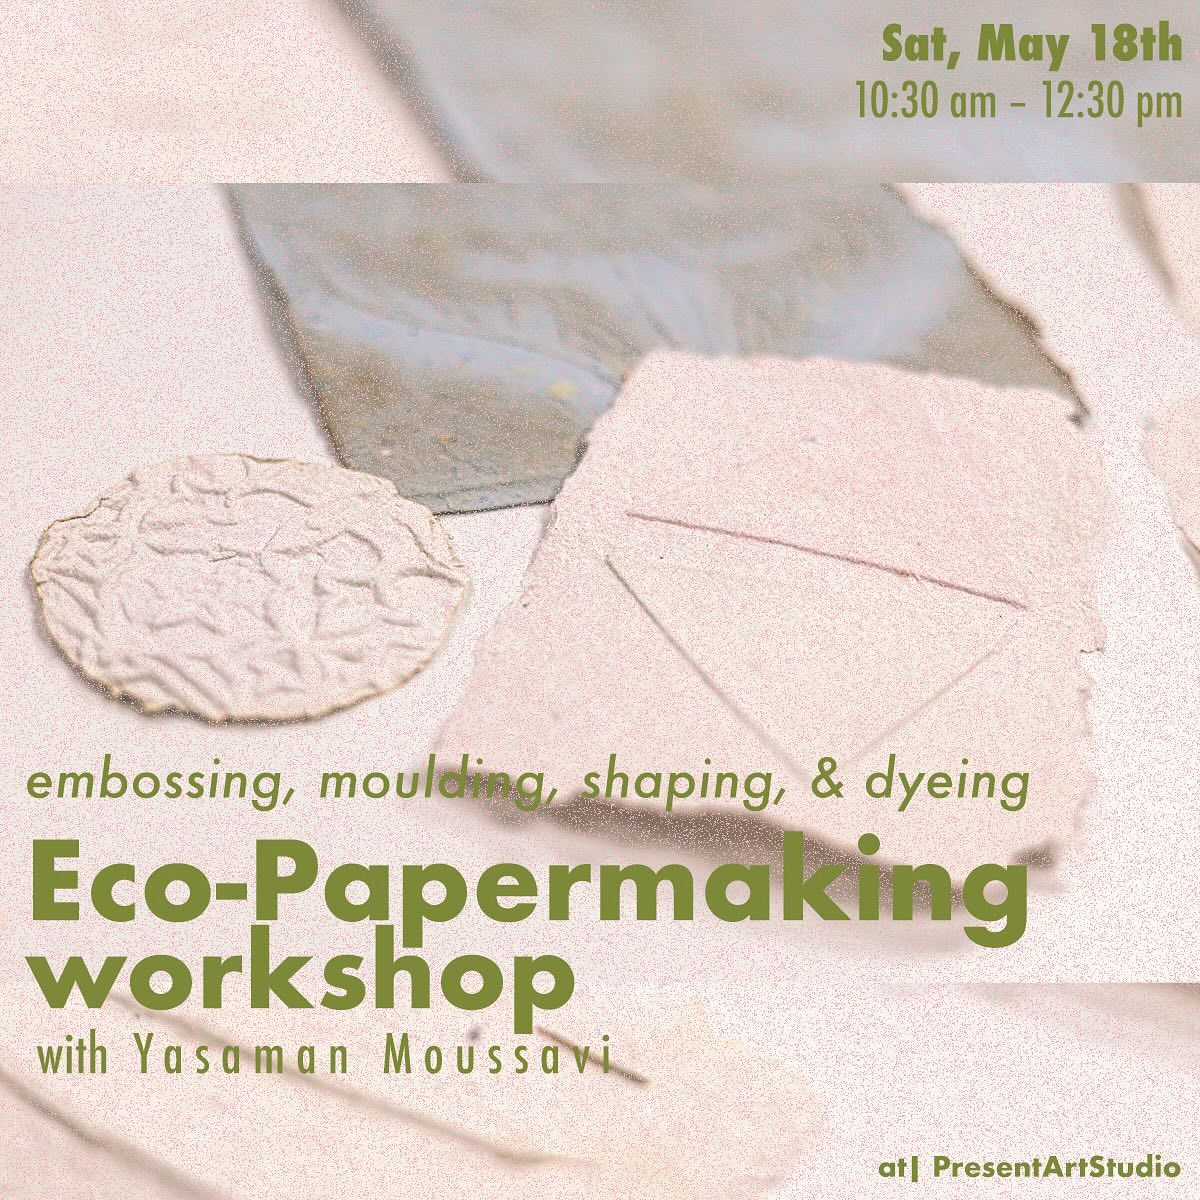 Eco-paper-making workshop: Embossing, moulding, shaping, & dyeing